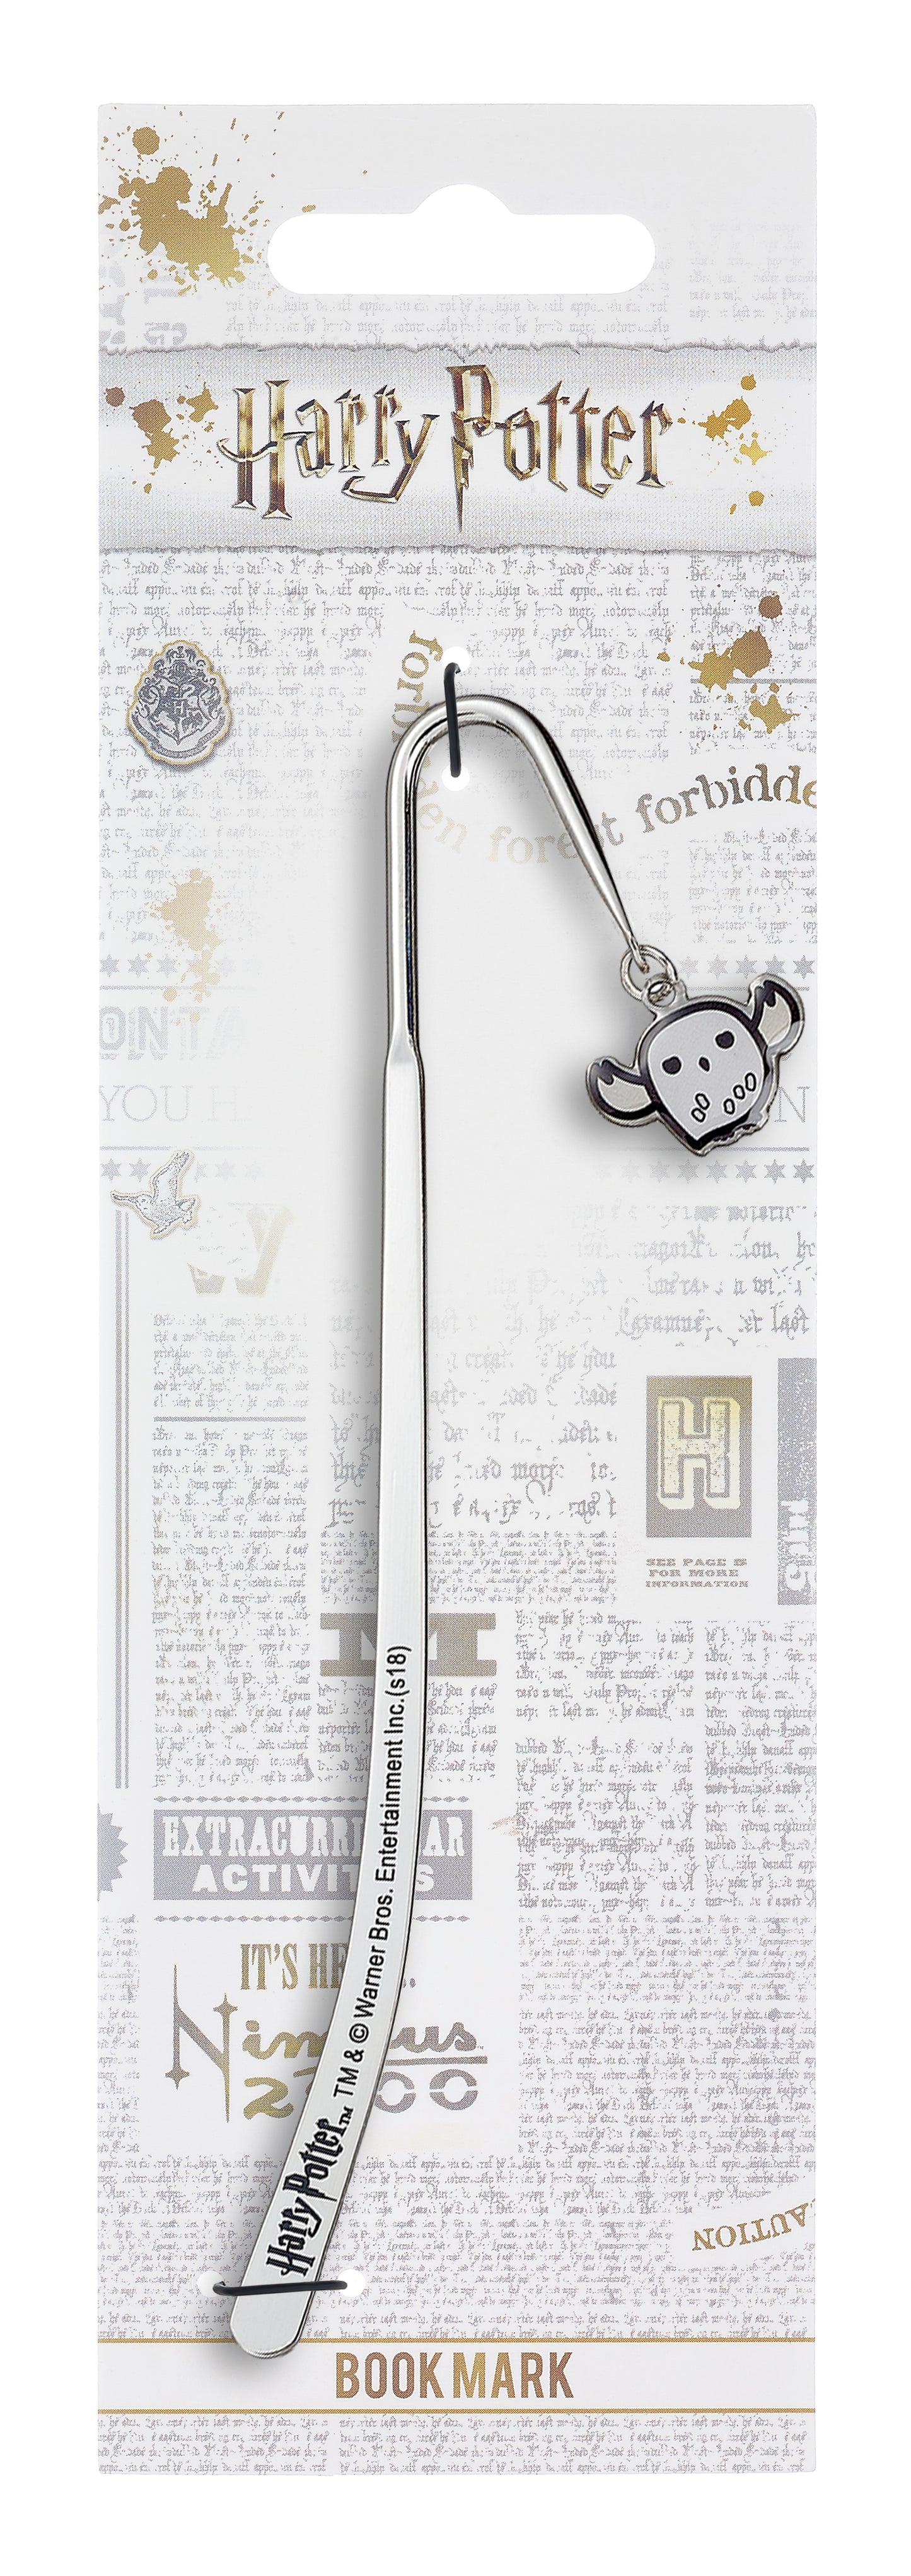 Harry Potter Hedwig the Owl Bookmark - Silver